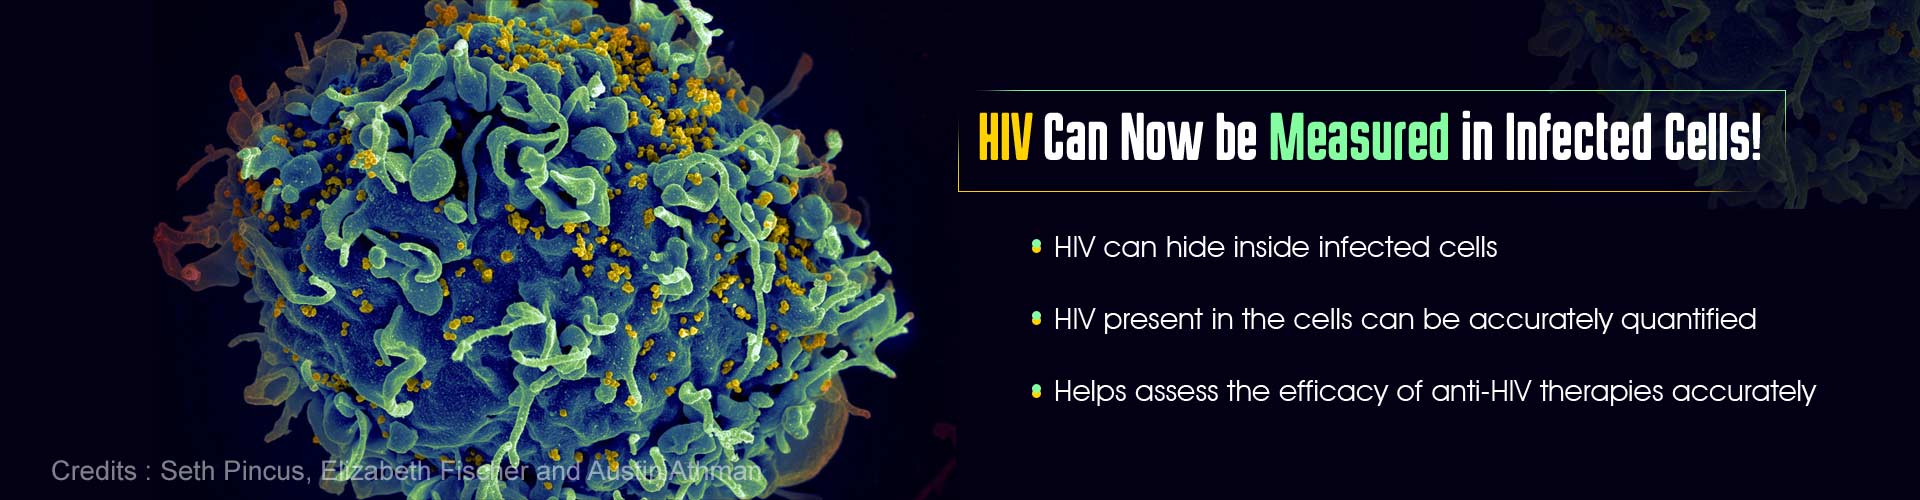 HIV can now be measured in infected cells. HIV can hide inside infected cells. HIV present in the cells can be accurately quantified. Helps assess the efficacy of anti-HIV therapies accurately.